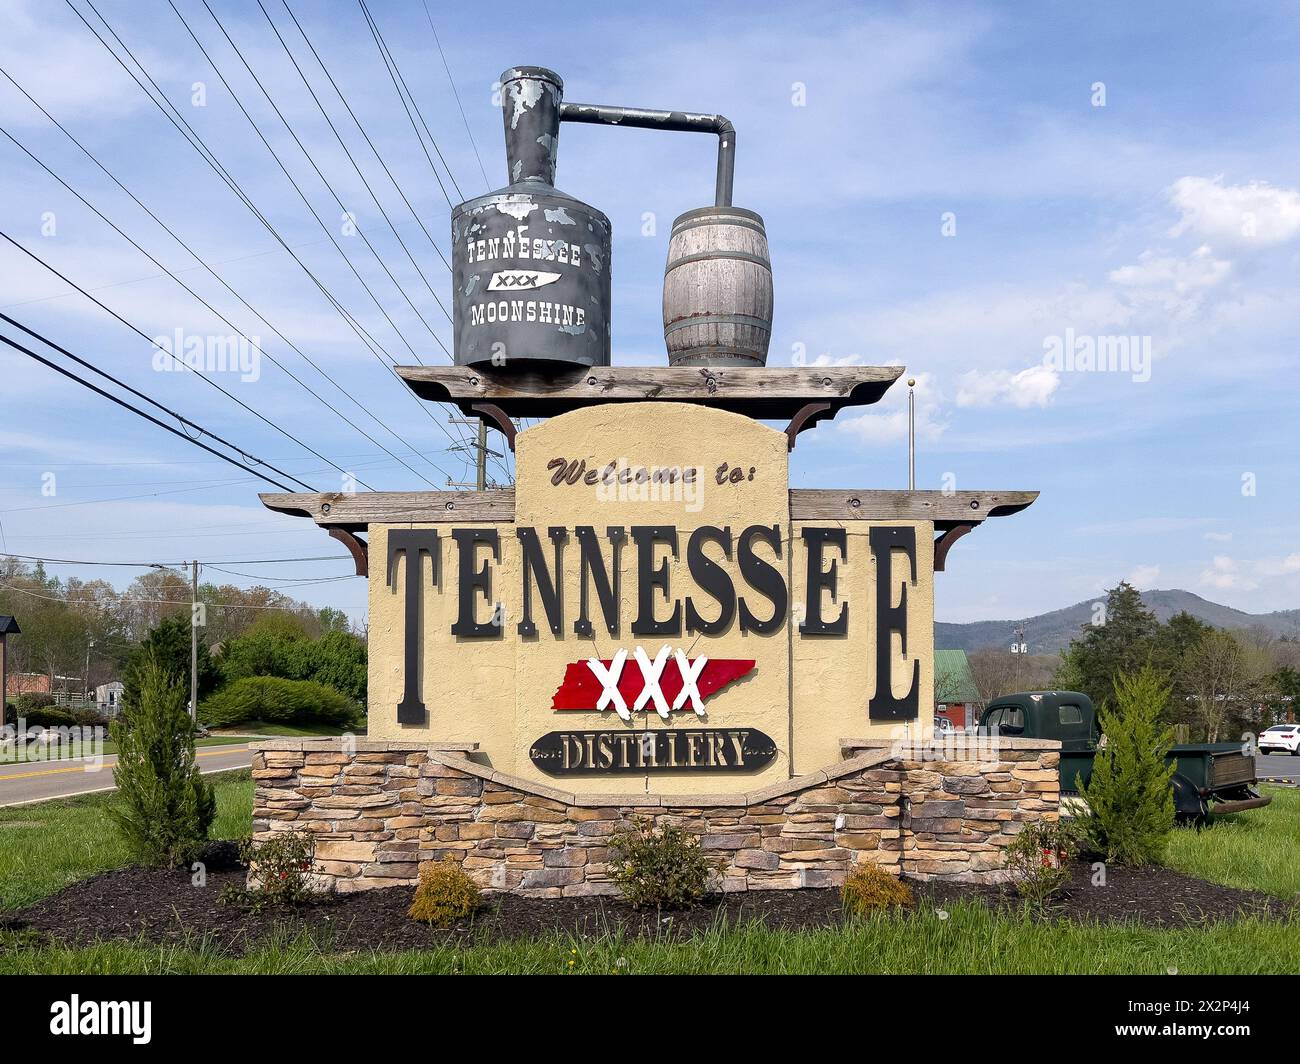 Tennessee Shine Co. is one of the leading moonshine distilleries in the country with their high alcohol content, smooth taste, and variety of flavors. Stock Photo